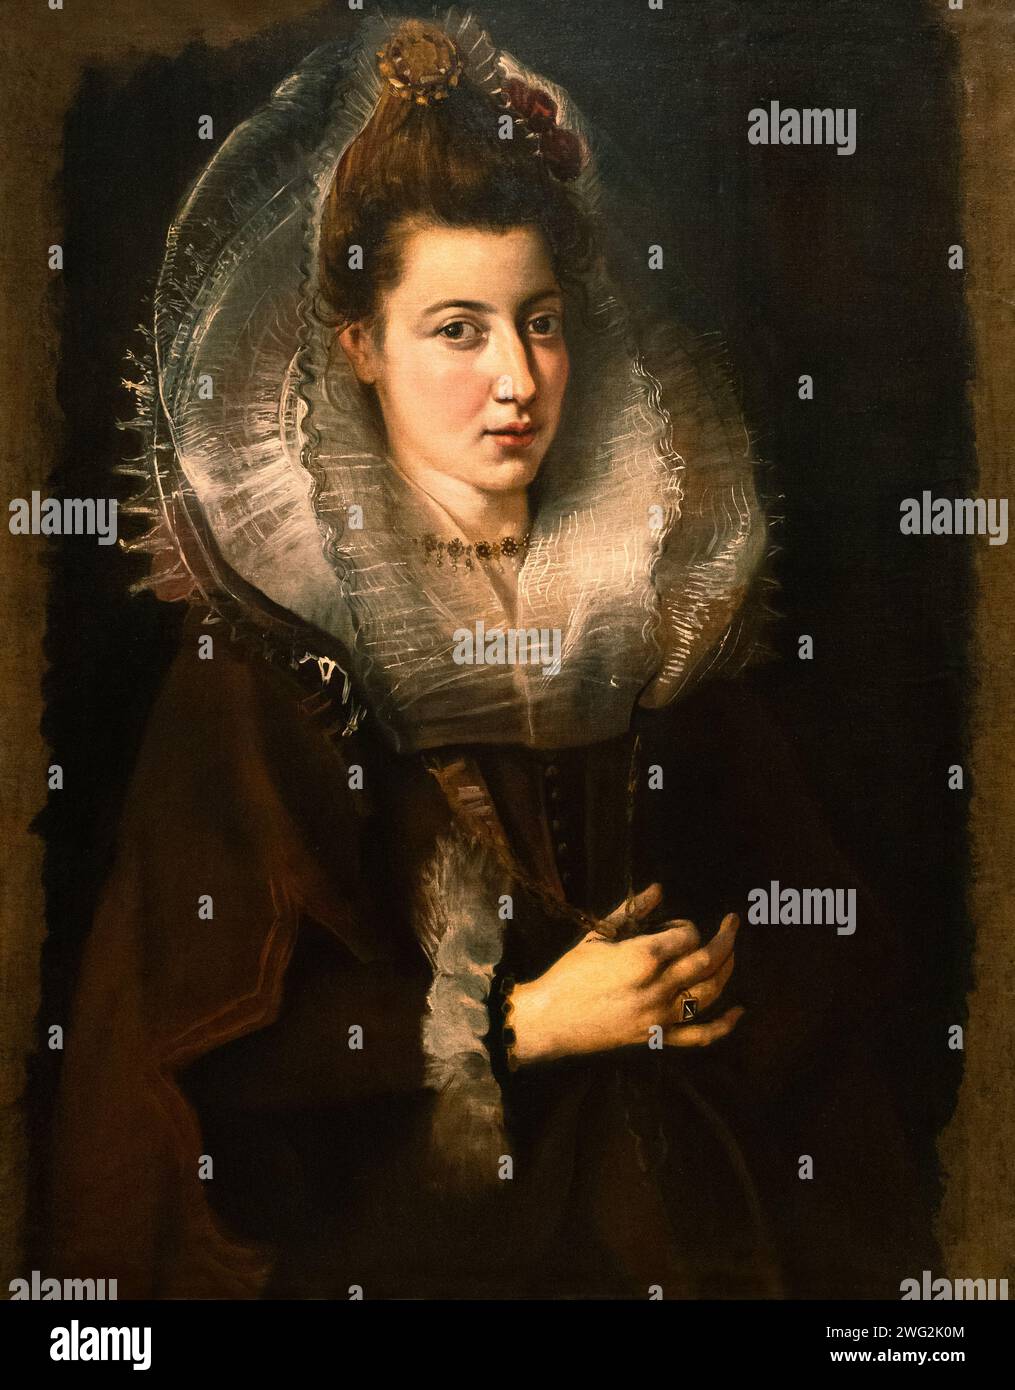 Peter Paul Rubens painting; 'Portrait of a Young Woman holding a Chain', c 1603-6. 17th century female portrait, The Klesch Collection of Art. Stock Photo